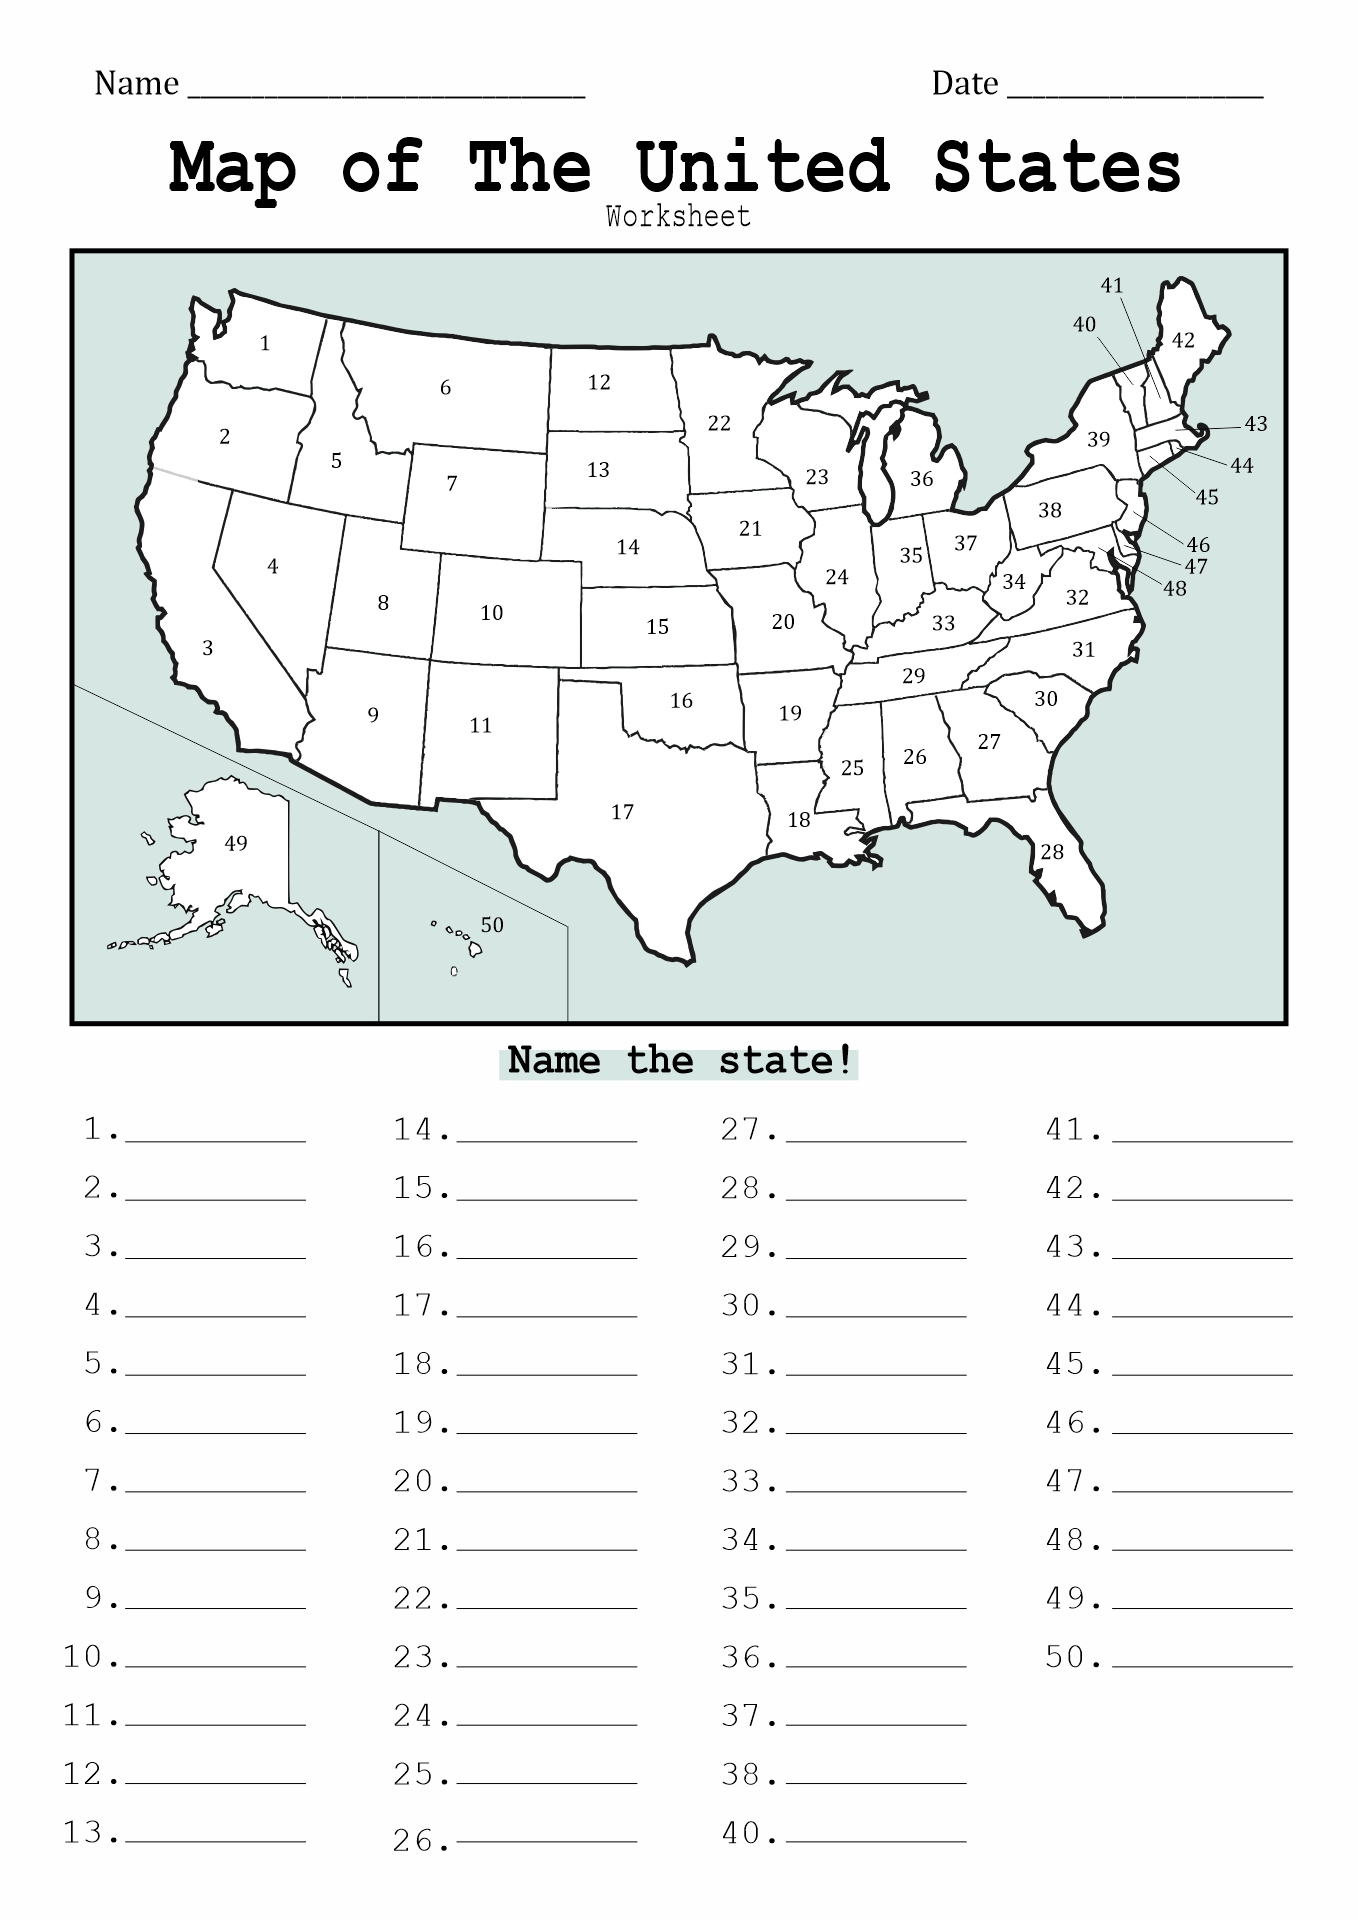 States And Capitals Quiz Printable